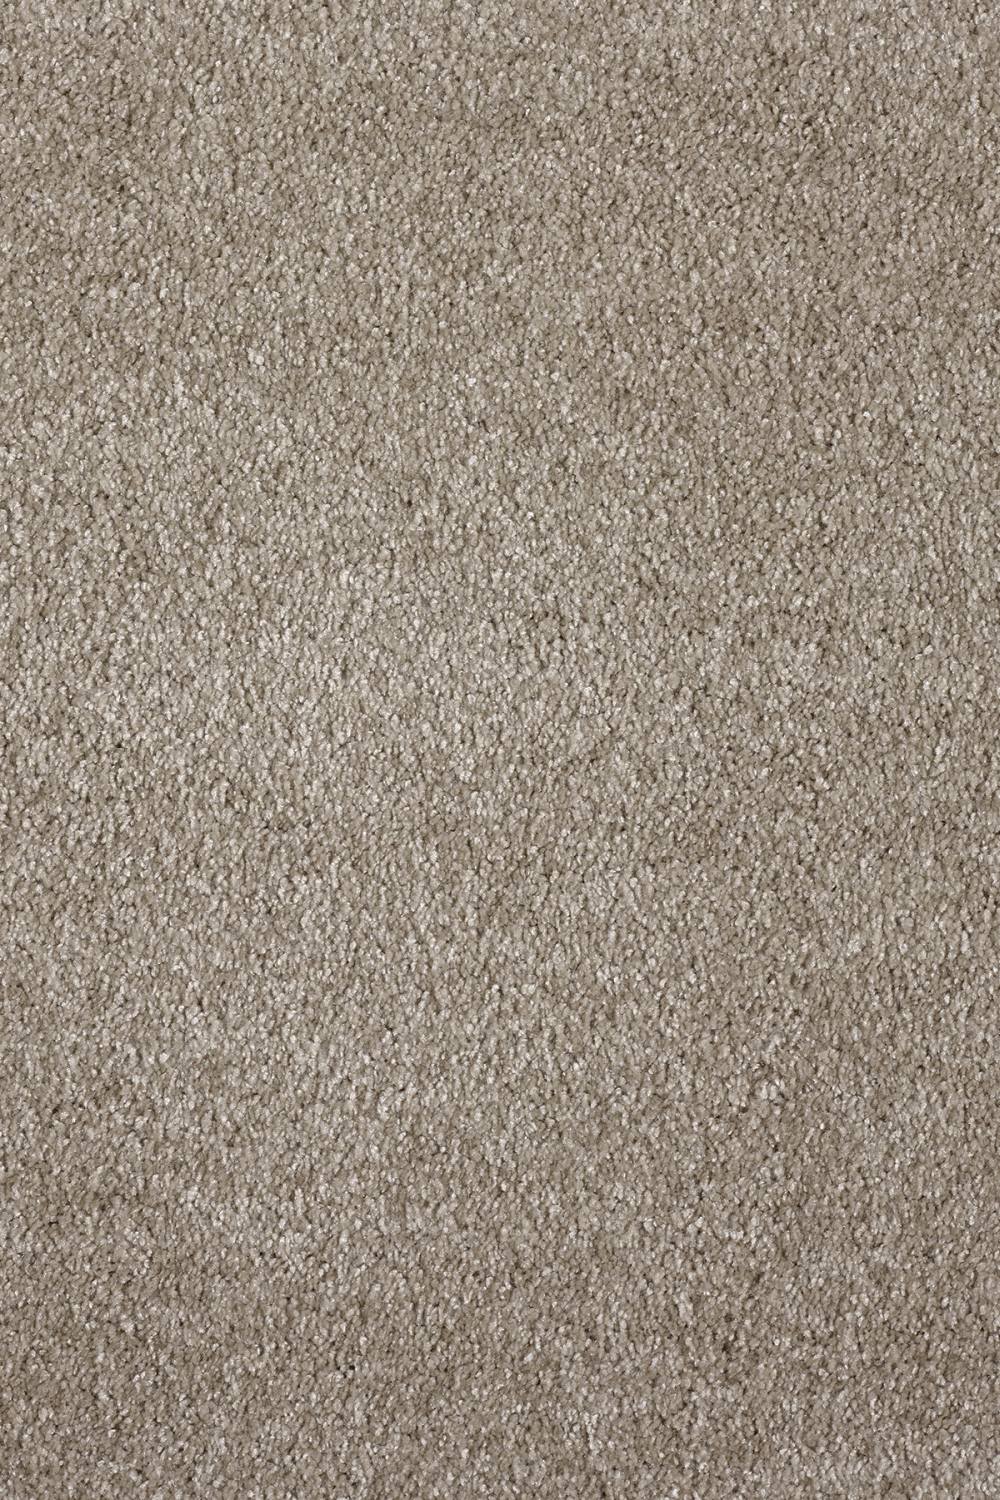 Parana Recycled Saxony Carpet - 34 Suede